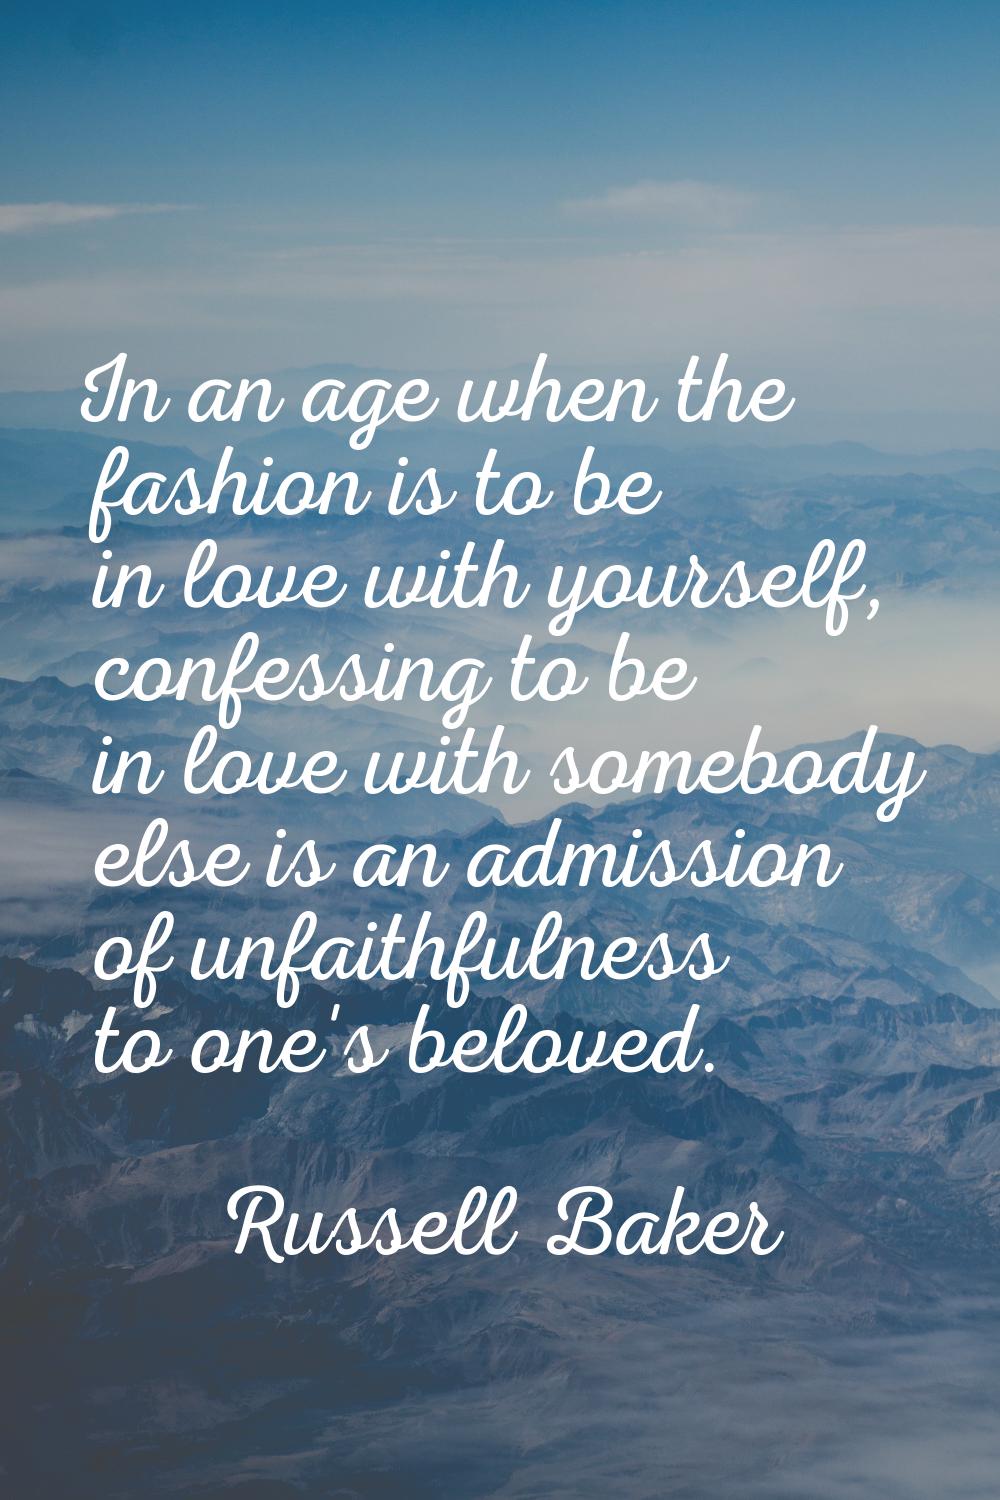 In an age when the fashion is to be in love with yourself, confessing to be in love with somebody e